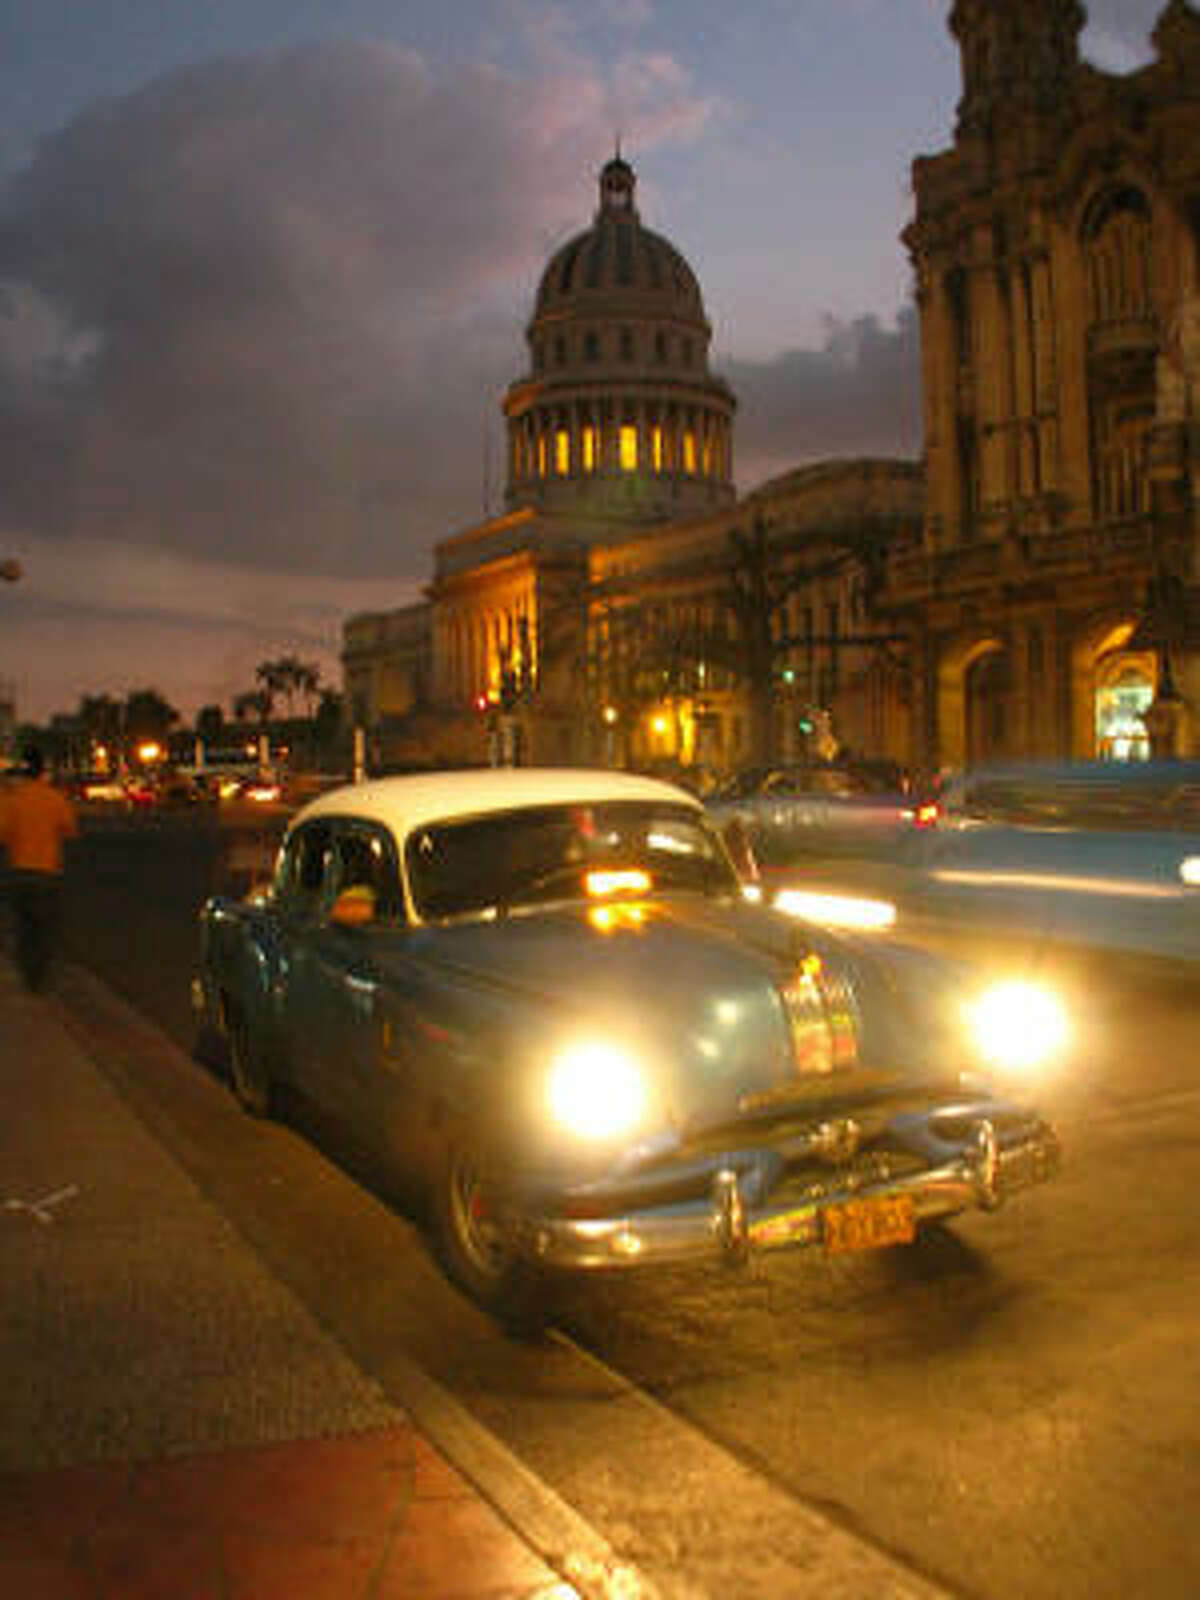 Hitchhikers jump into a classic 1950s car with the former National Capitol building in the background in Havana, Cuba.